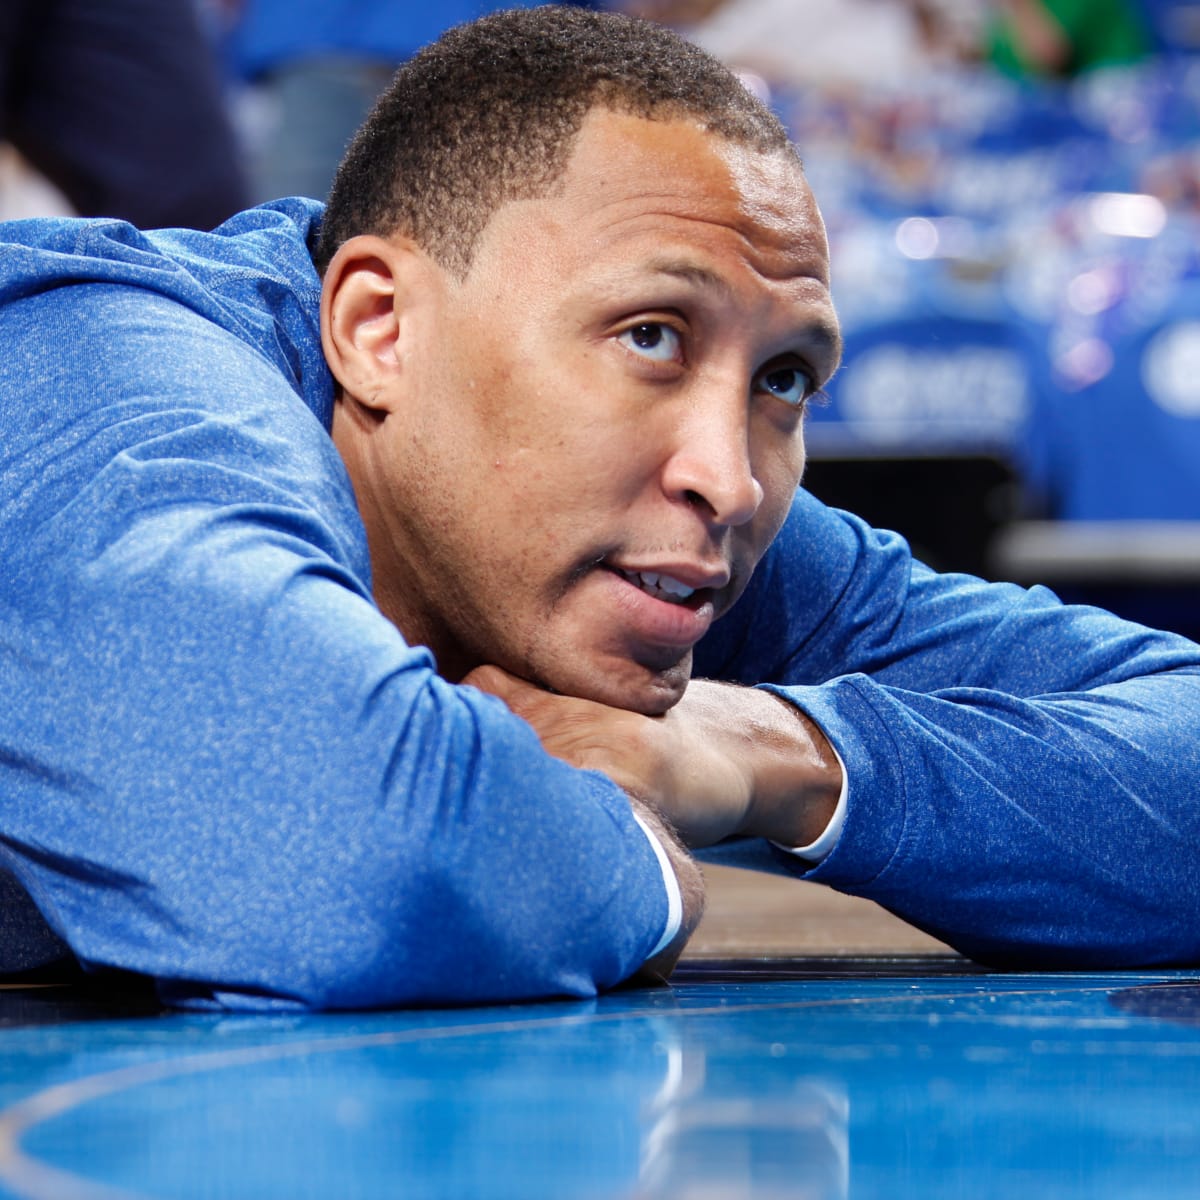 Shawn Marion to sign contract with Cleveland Cavaliers